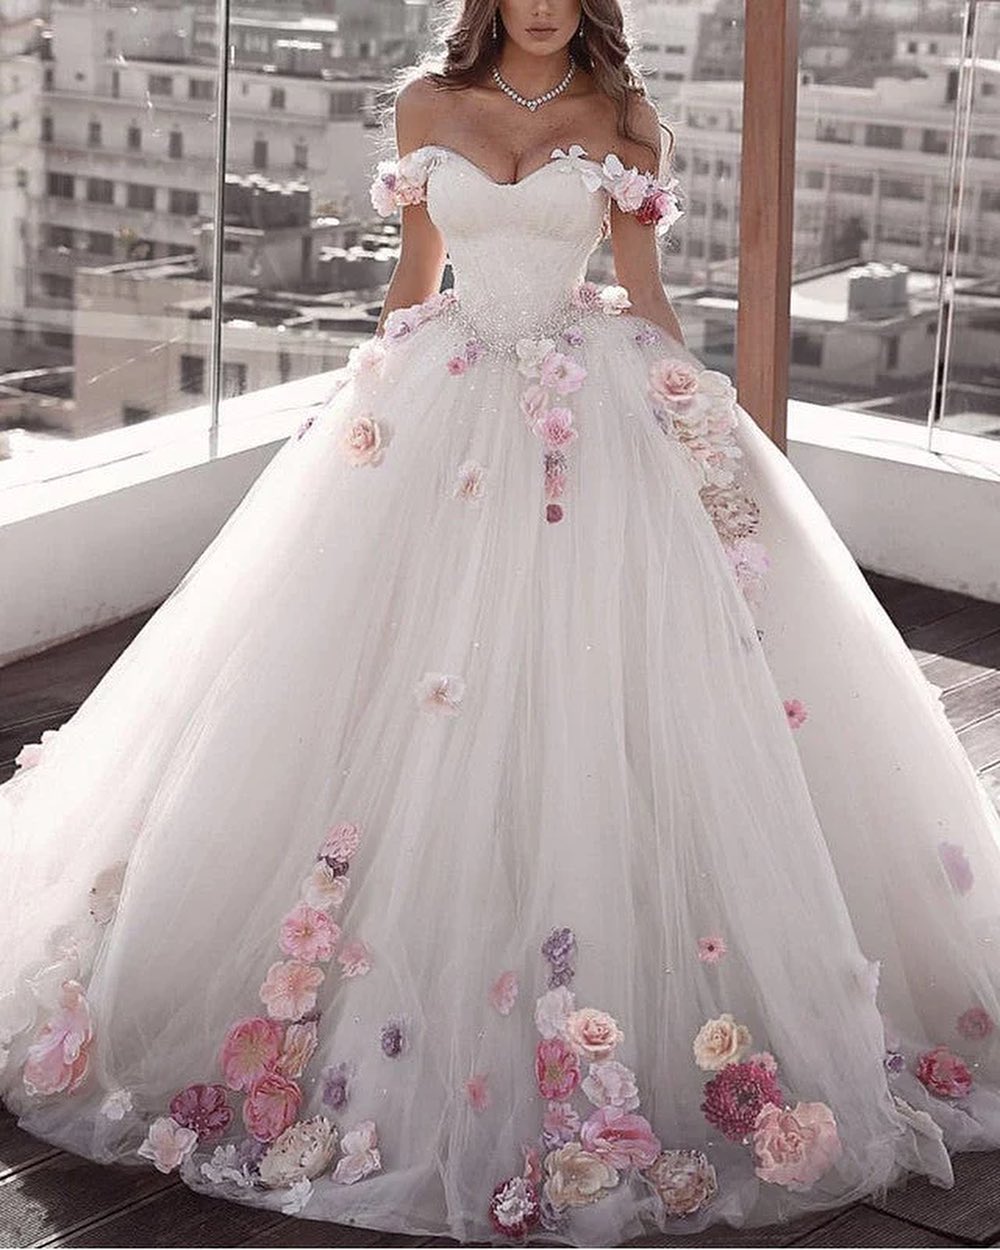 Let's Celebrate The Beauty Of Floral Wedding Dresses - New York Bride &  Groom of Columbia